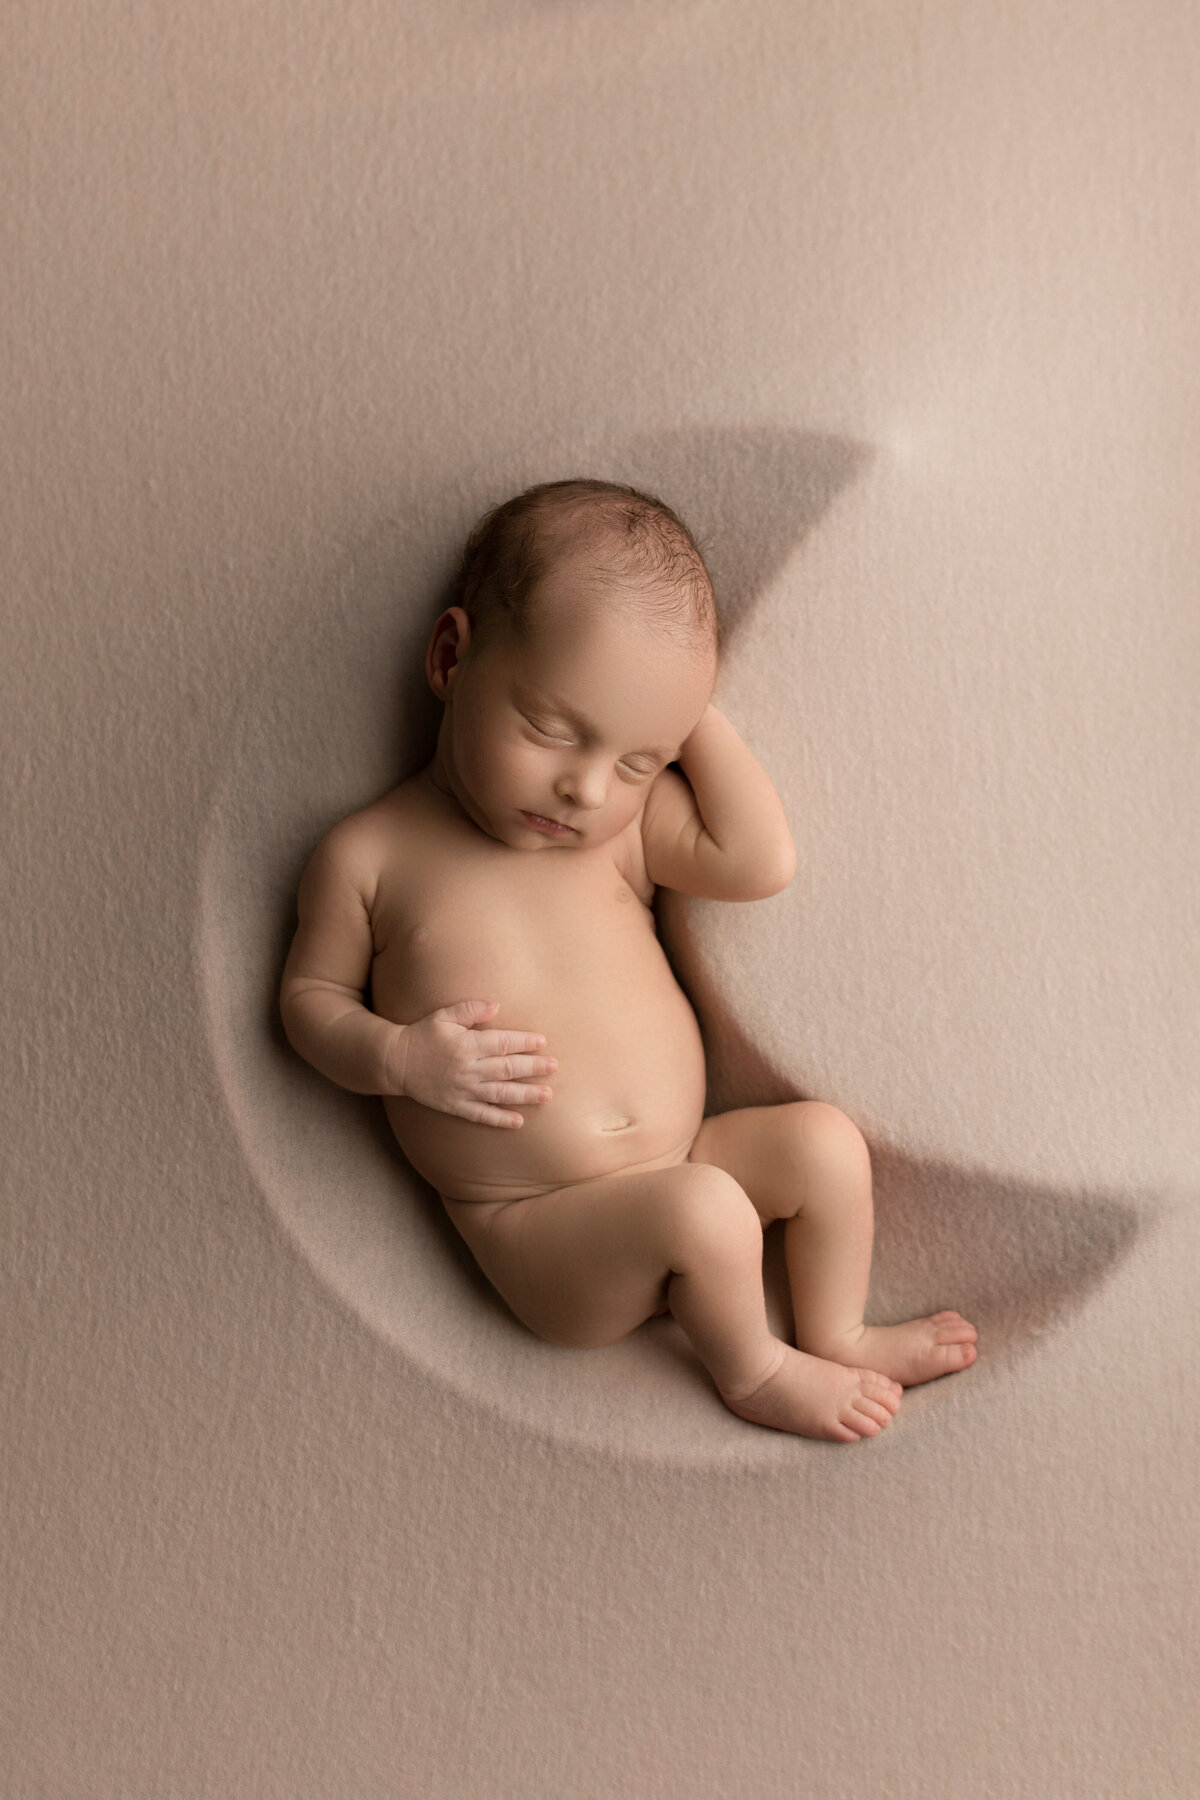 Newborn baby boy is sleeping atop of a moon shape. One of baby's hands is resting on his belly, the other underneath his head. Baby's legs are curled inside of the moon-shape. Image captured by New Jersey's best newborn photographer, Katie Marshall,.